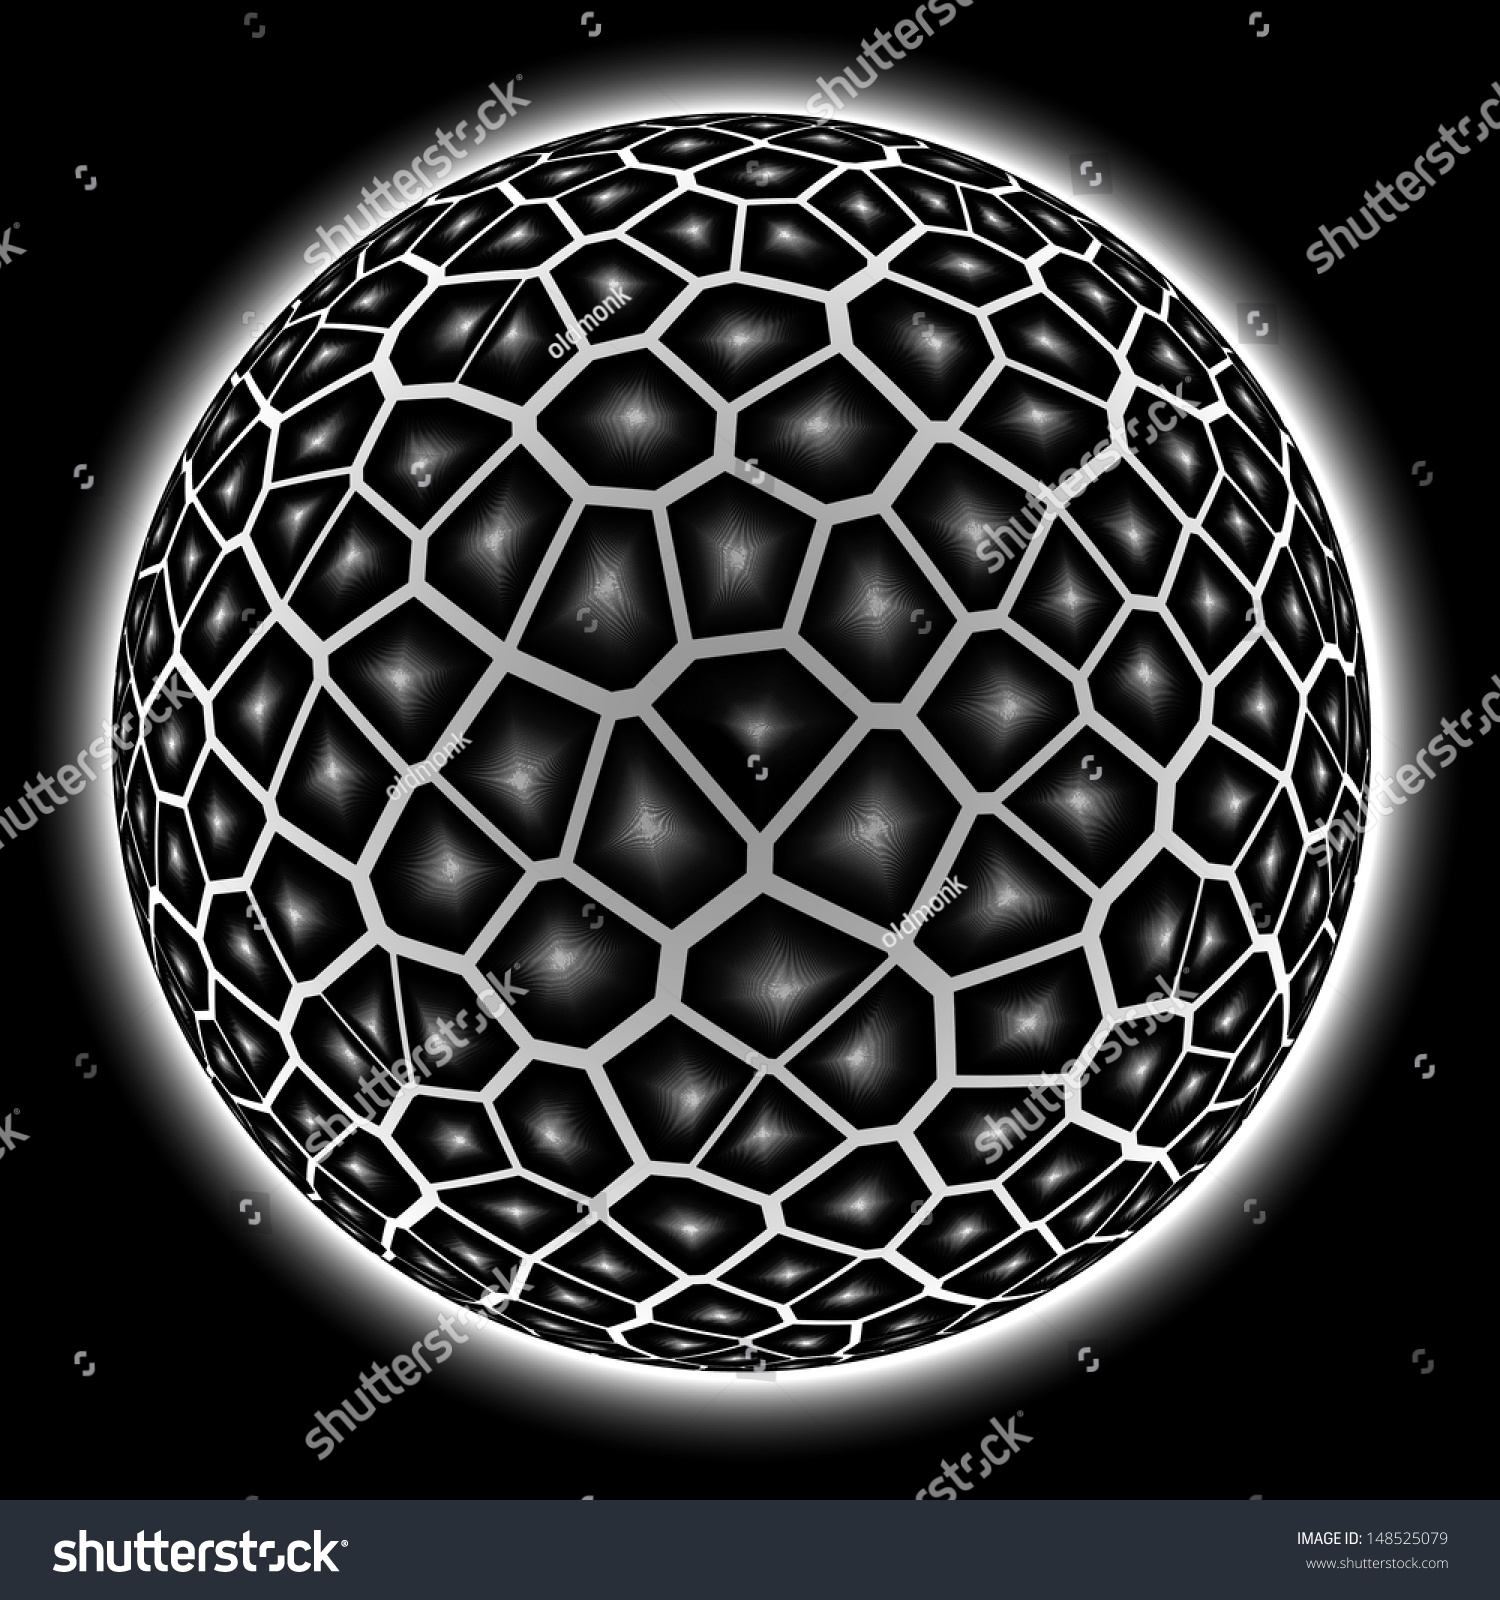 3d Sphere Abstract Fractal Background Stock Illustration 148525079 ...